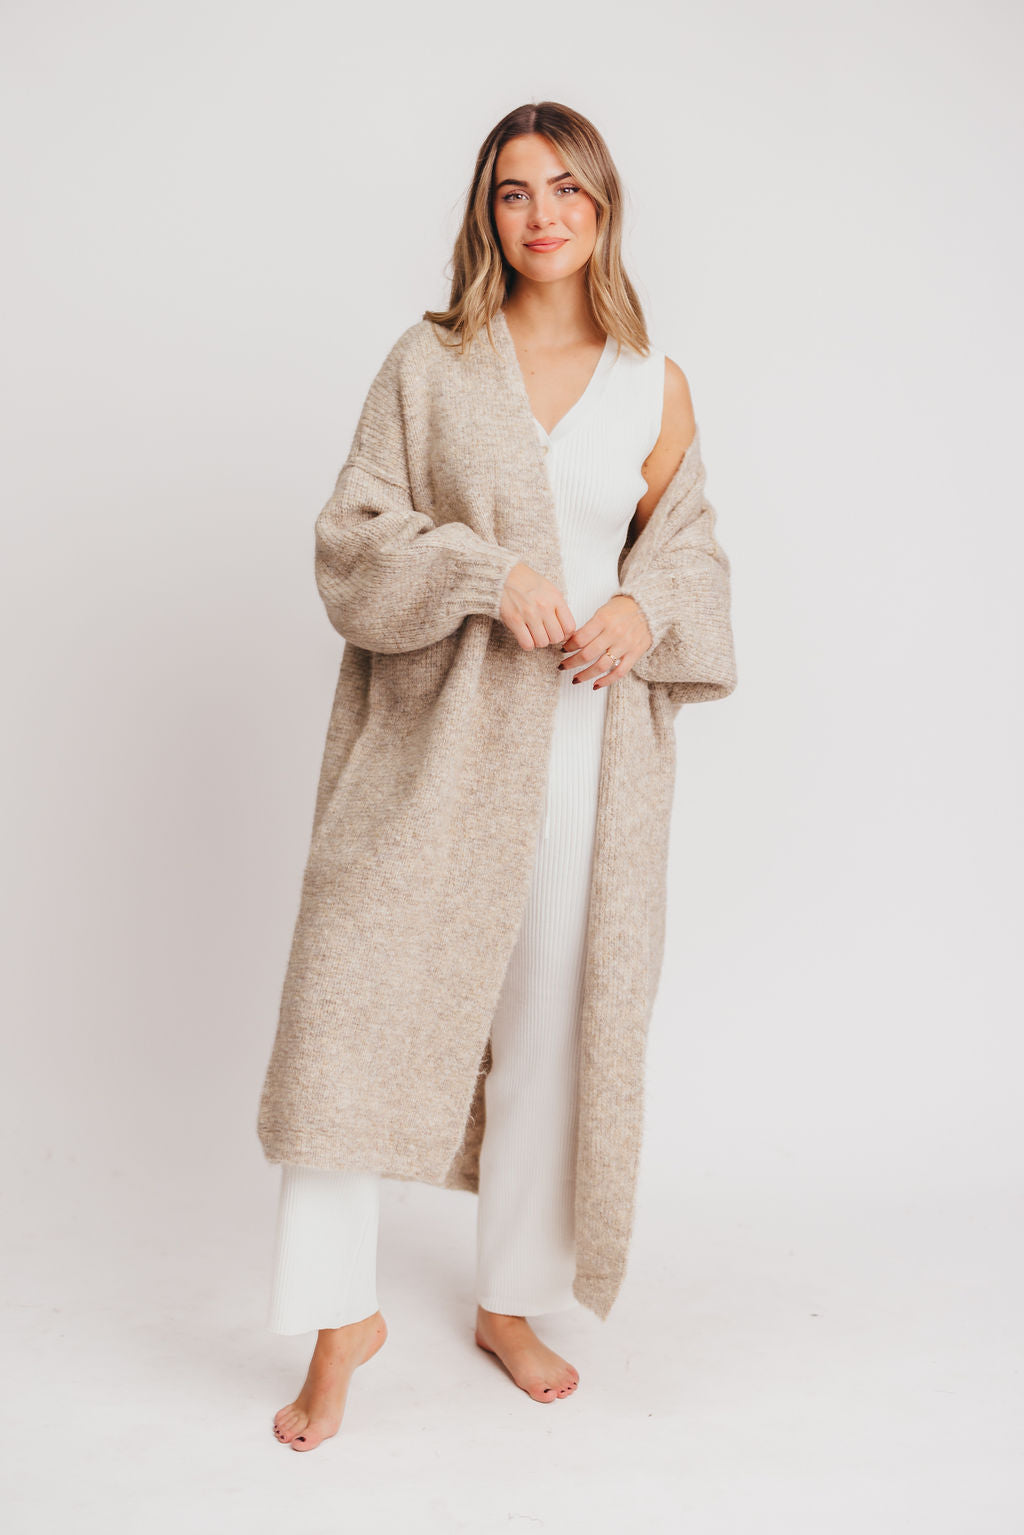 Worth Amelia – Cardigan Collective Oversized Oatmeal Edge in Rolled